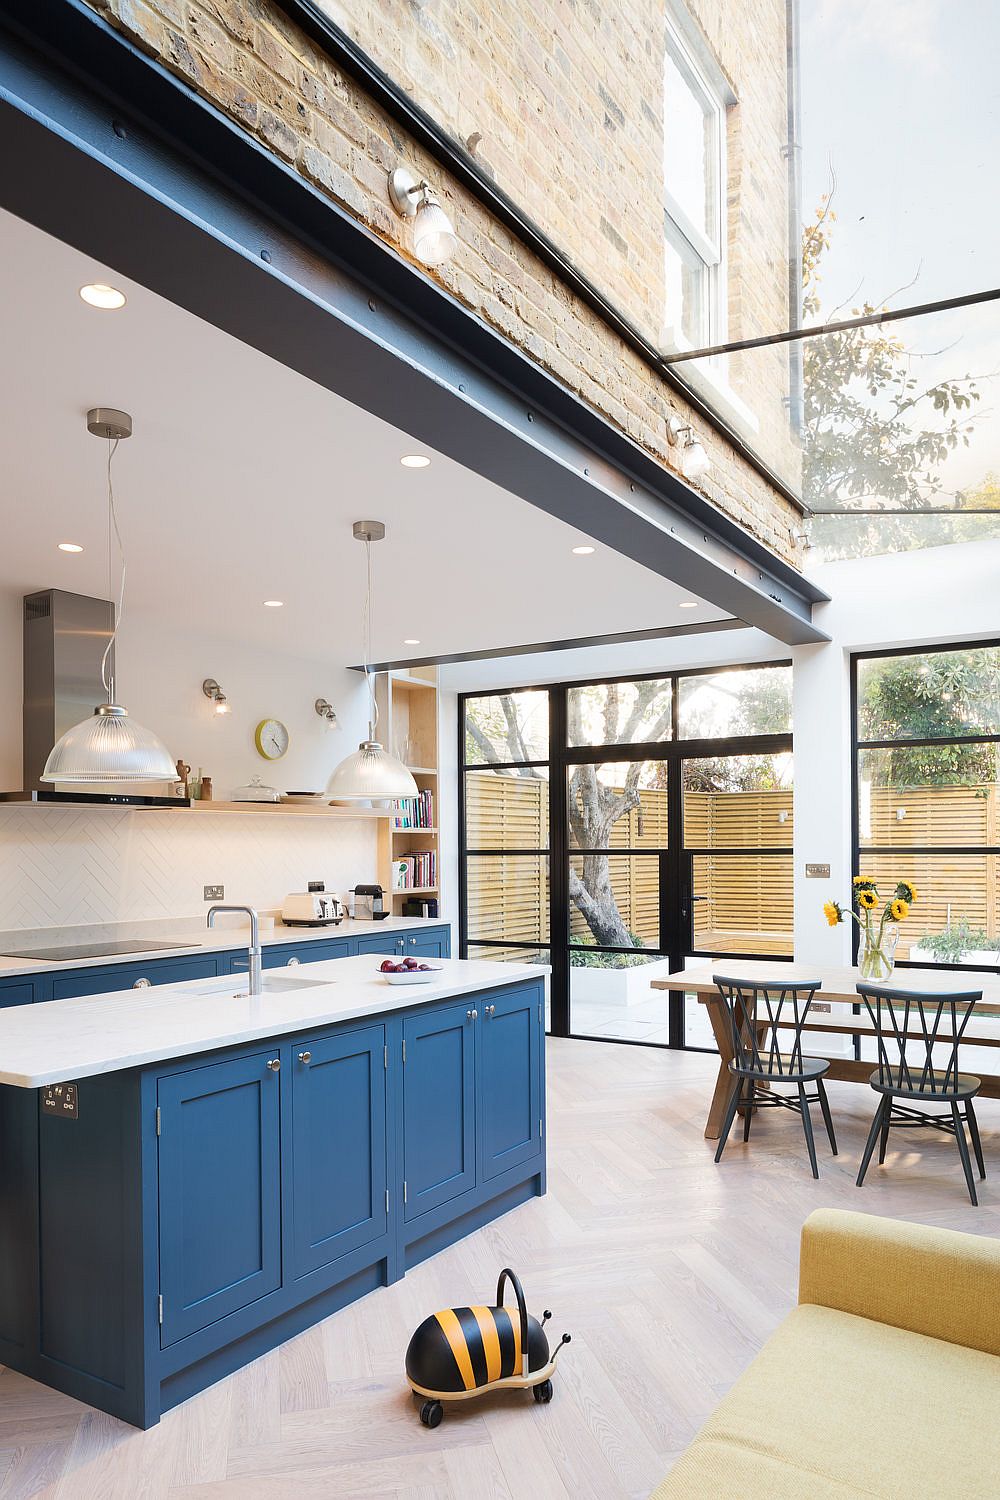 Large-glass-skylight-fills-the-kitchen-with-natural-light